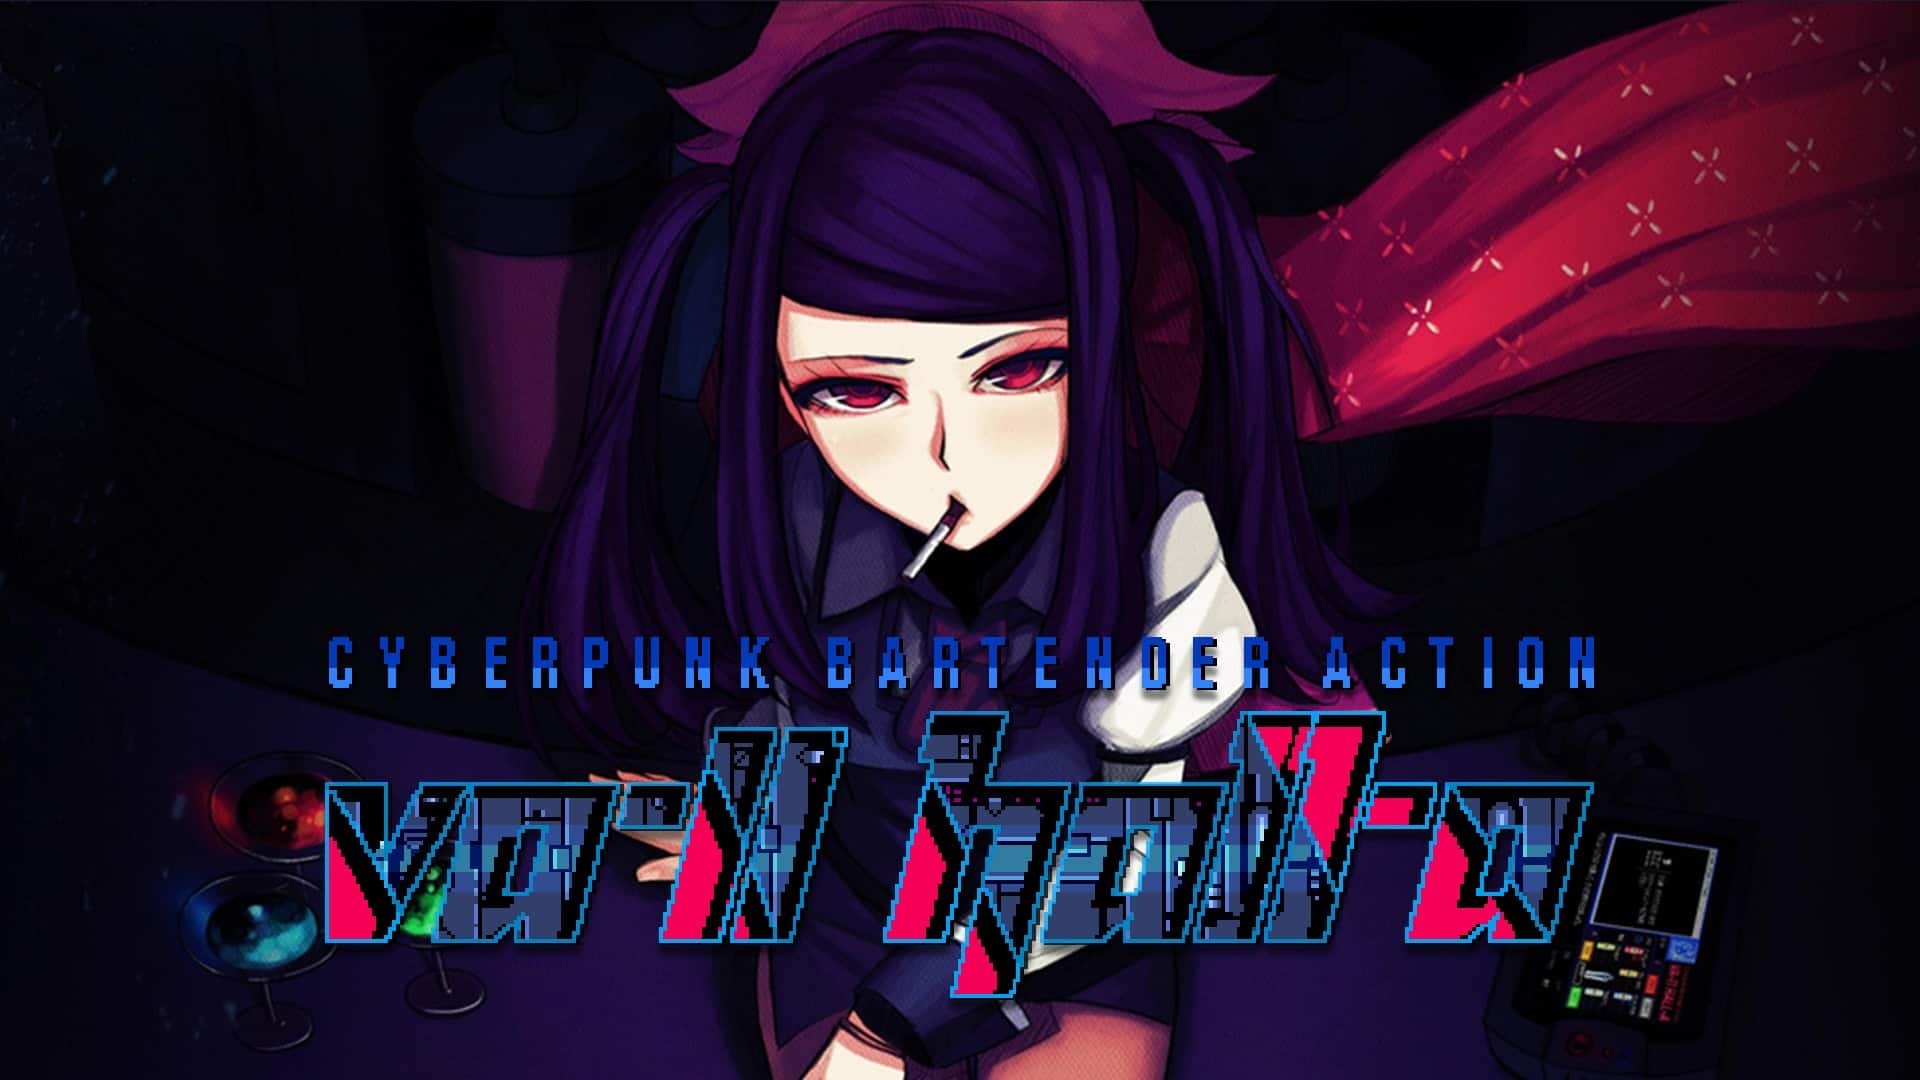 VA-11 HALL-A: Cyberpunk Bartender Action Mixes Fresh Drinks on Nintendo Switch and PlayStation 4